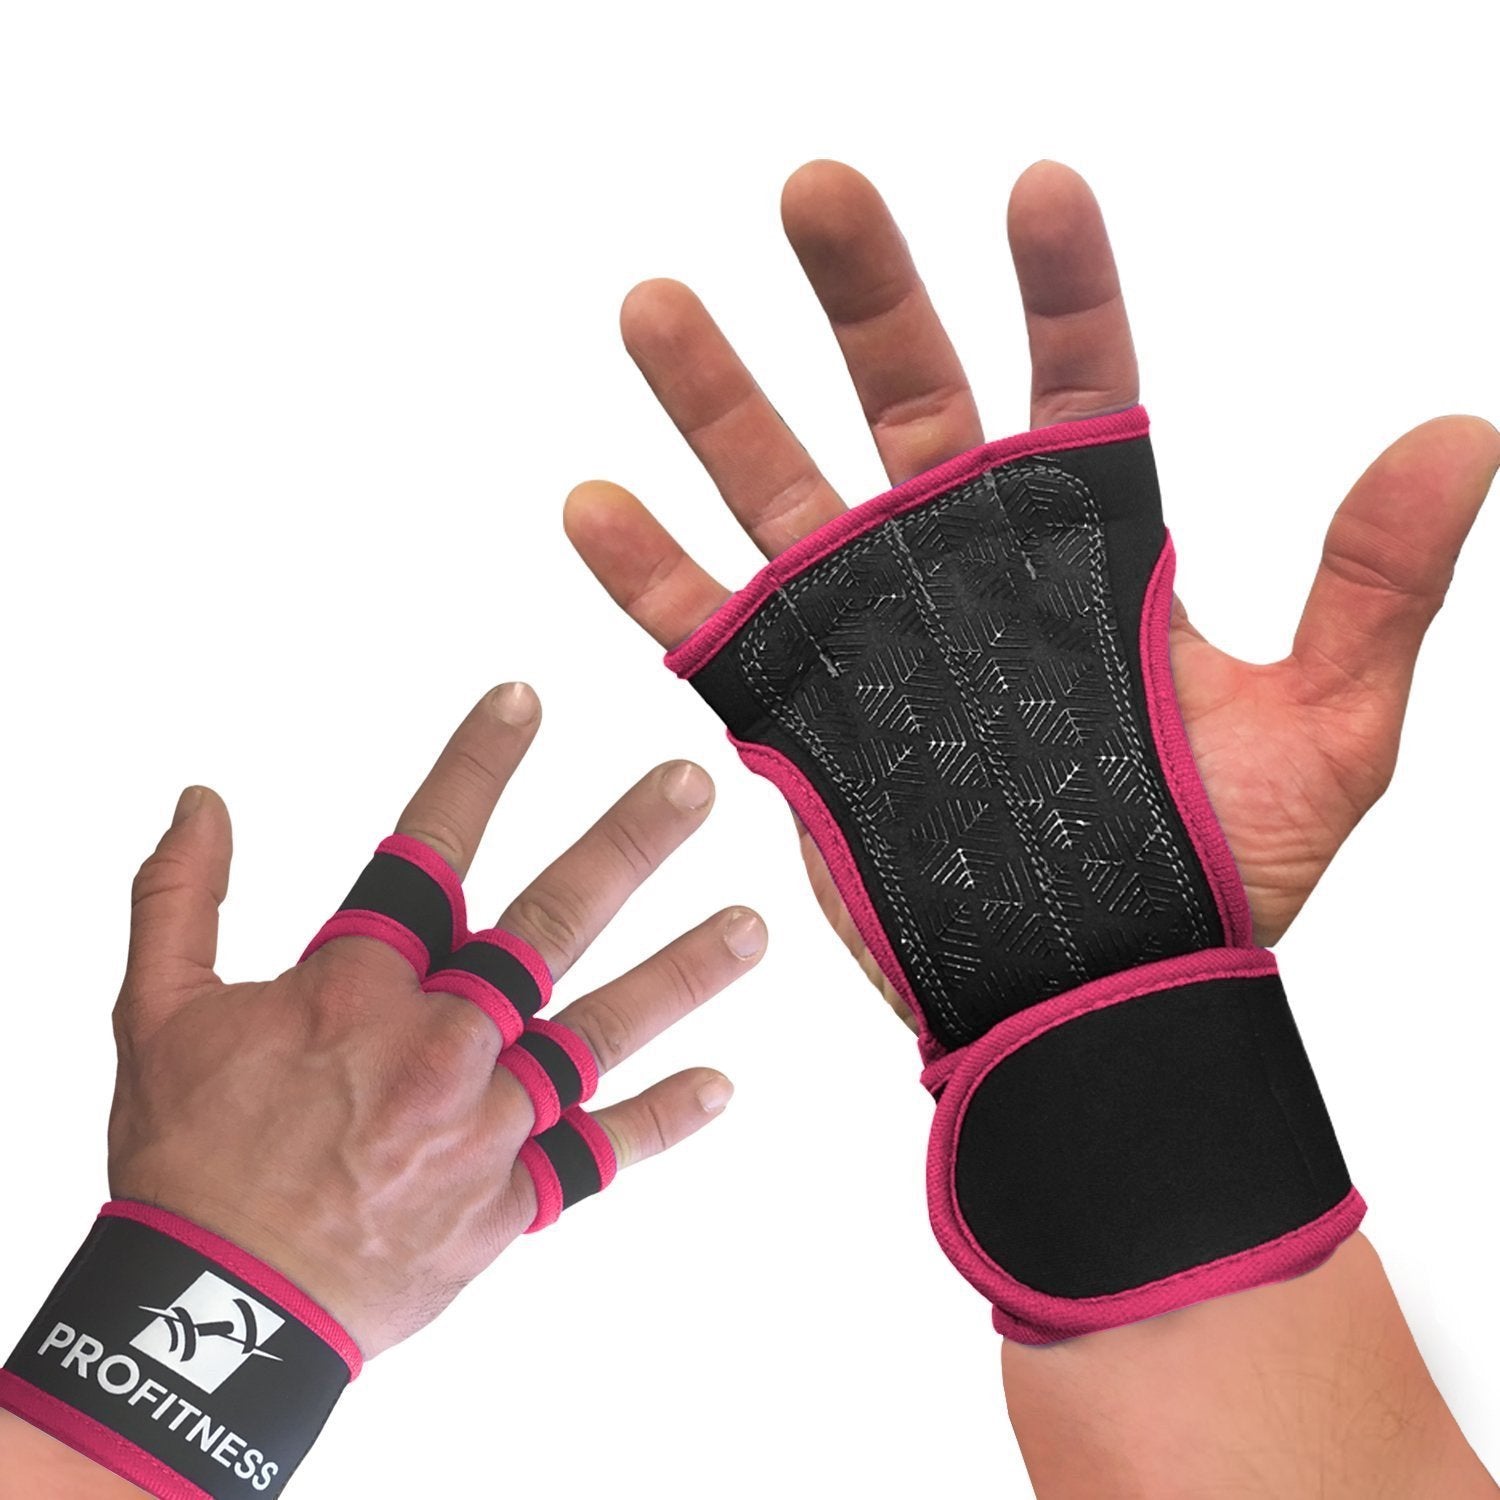 ProFitness Ventilated Cross Training Gloves with Wrist Support - Split Leather with Silicone Padding for Strong Grip + Protection from Injury - for Gym Workout, Weightlifting, Powerlifting & WOD Pink Medium